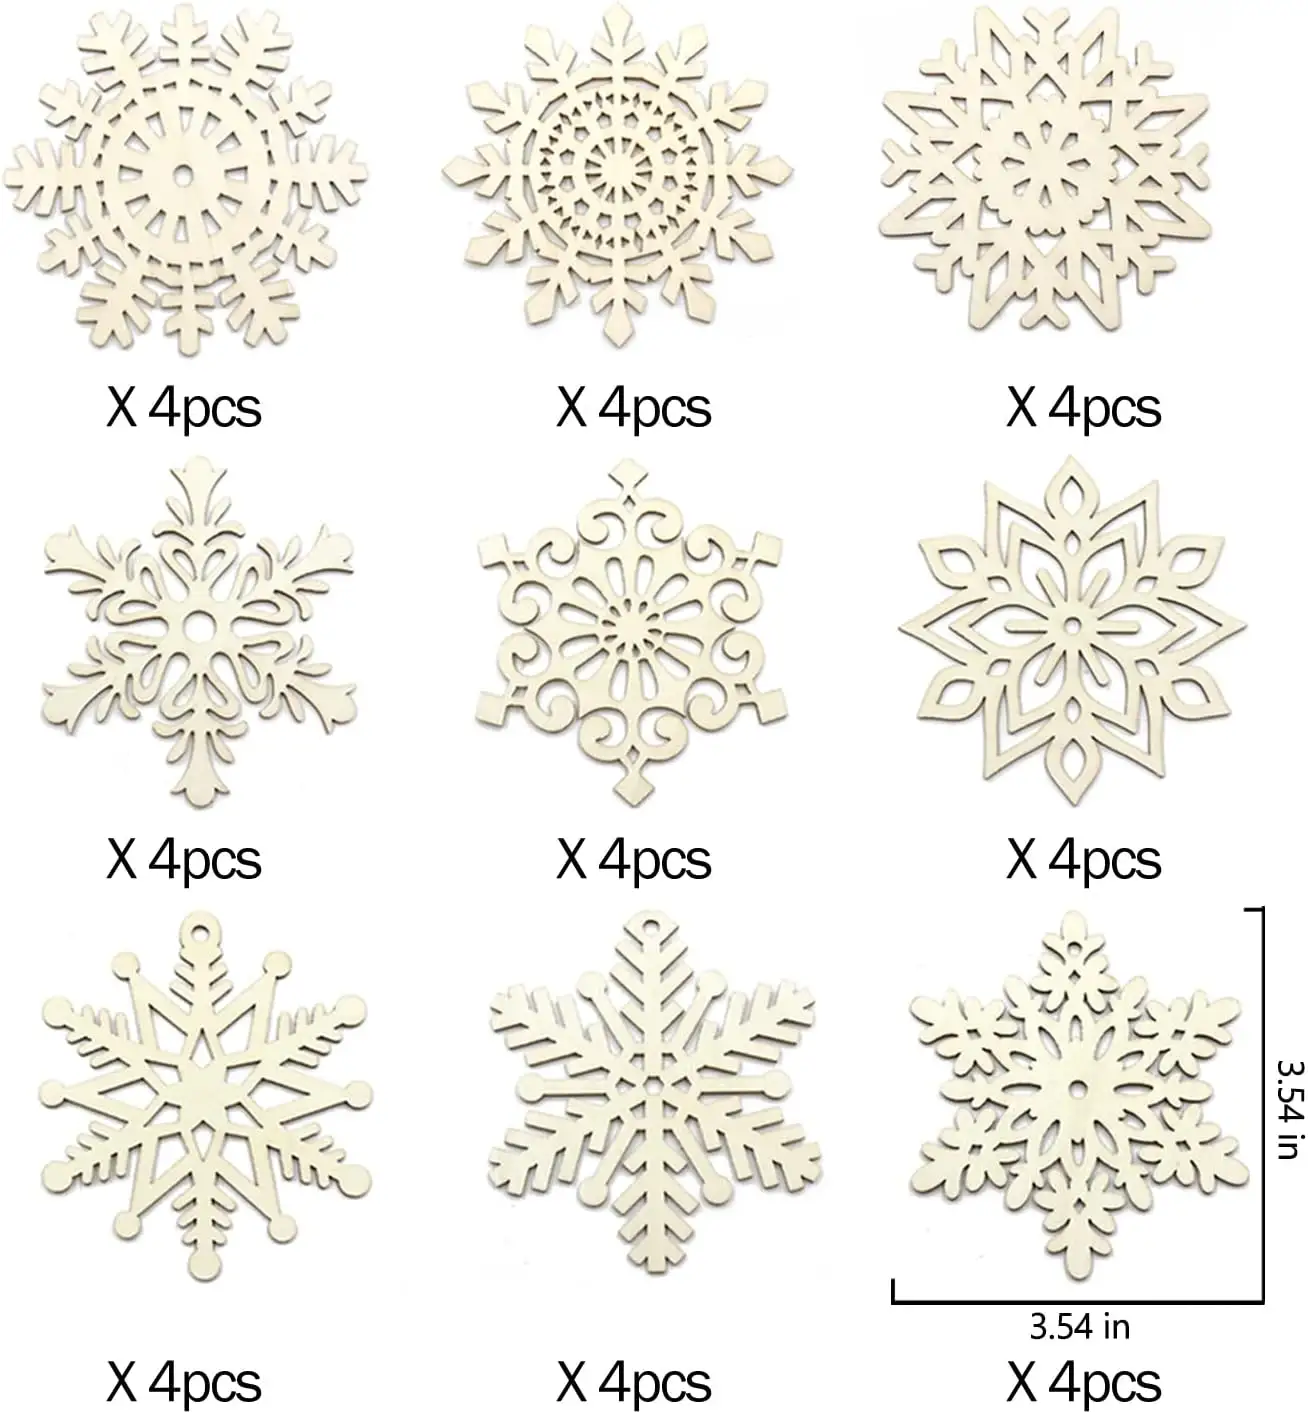 30pcs Wooden Snowflakes Ornaments For Christmas 4 inch Wood Hanging Decorations Rustic Christmas Tree Crafts